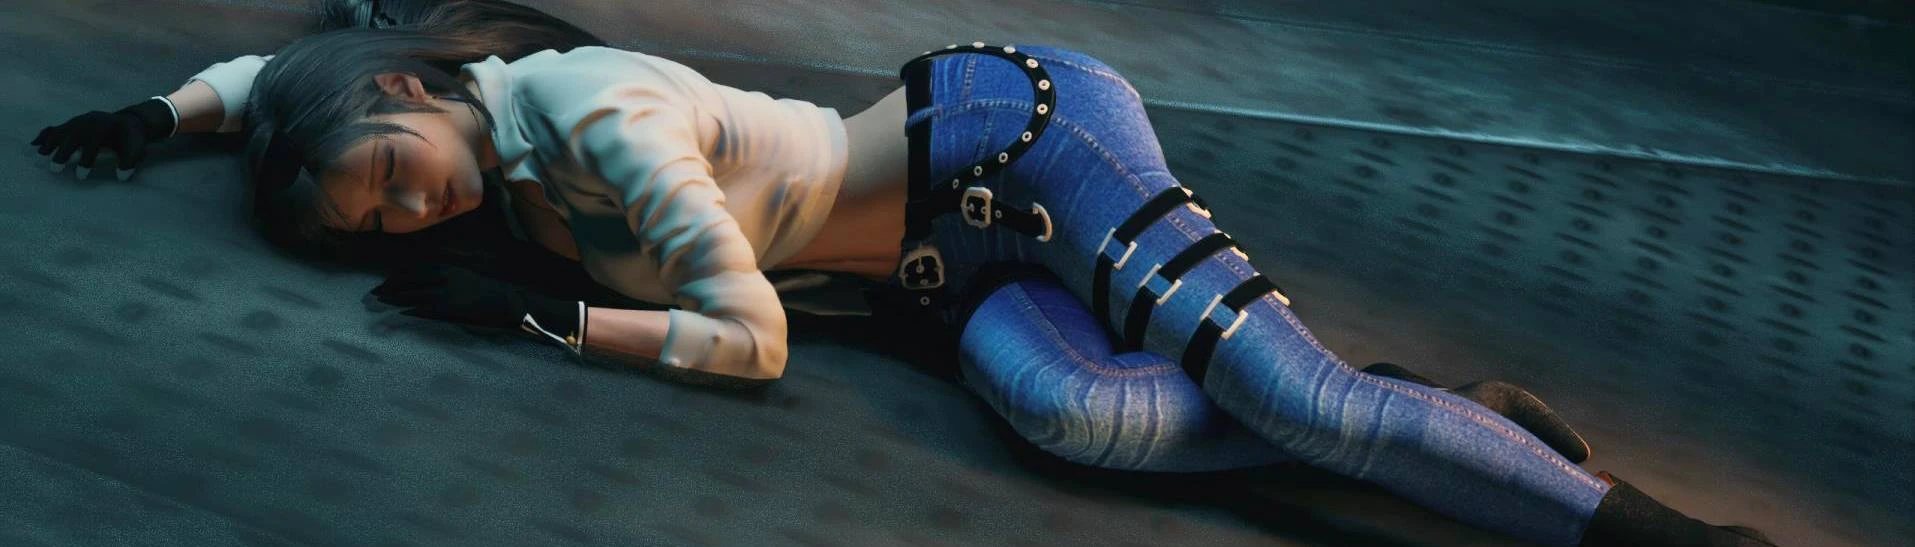 Tifa Stylish Sexy Jeans Outfit at Final Fantasy VII Remake Nexus 